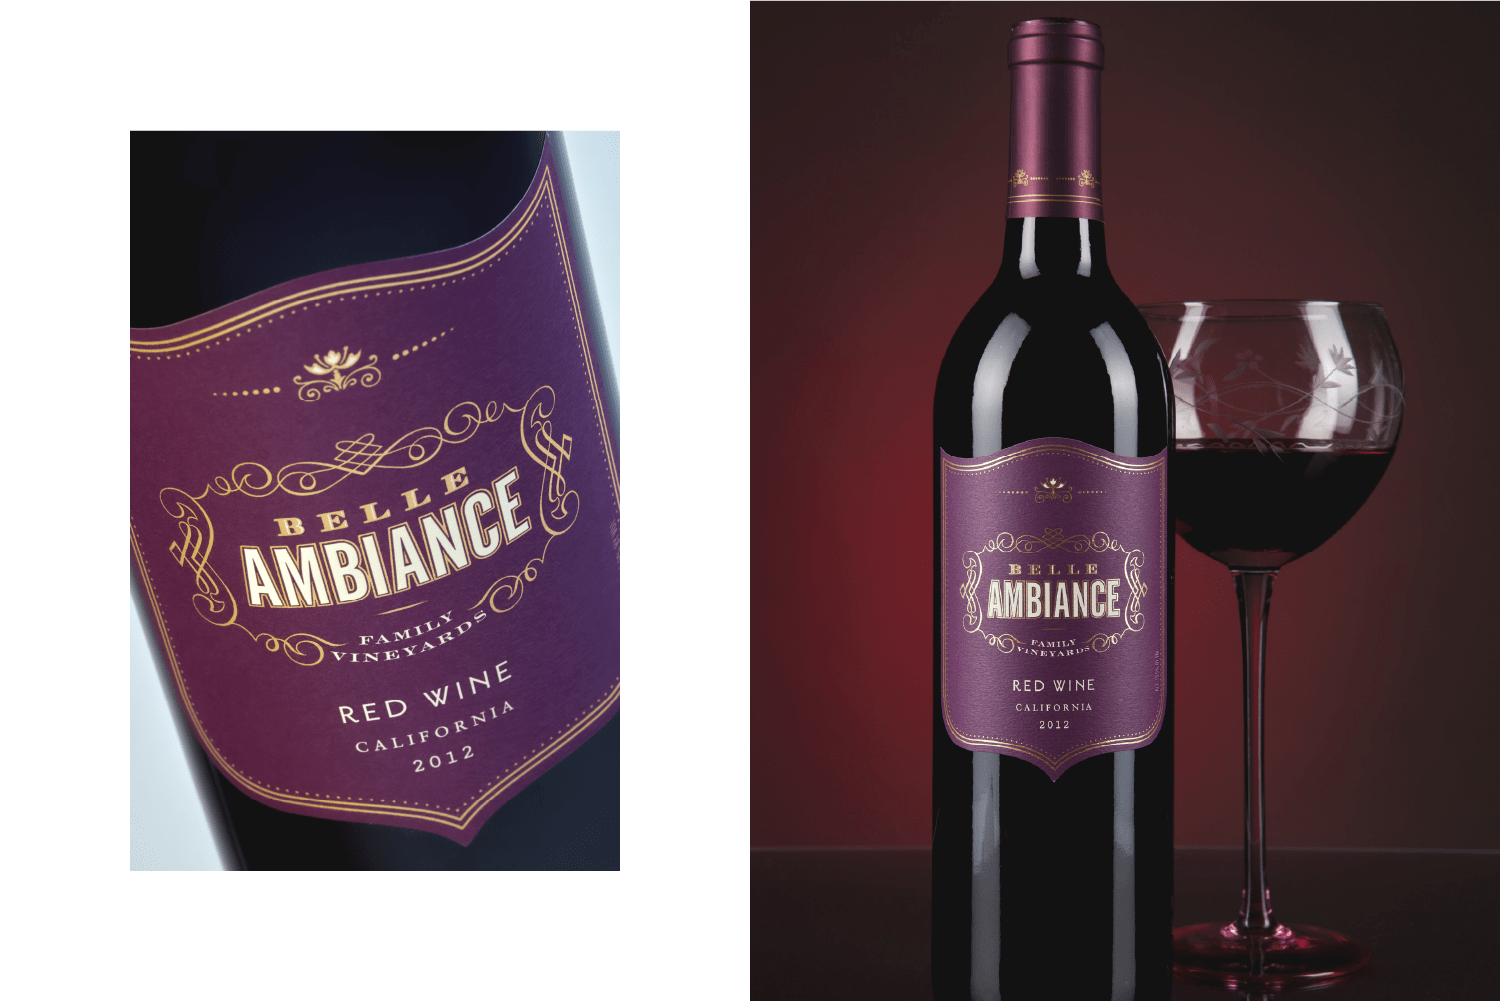 Belle Ambiance Red Wine — branding and packaging design by Juli Shore Design. 